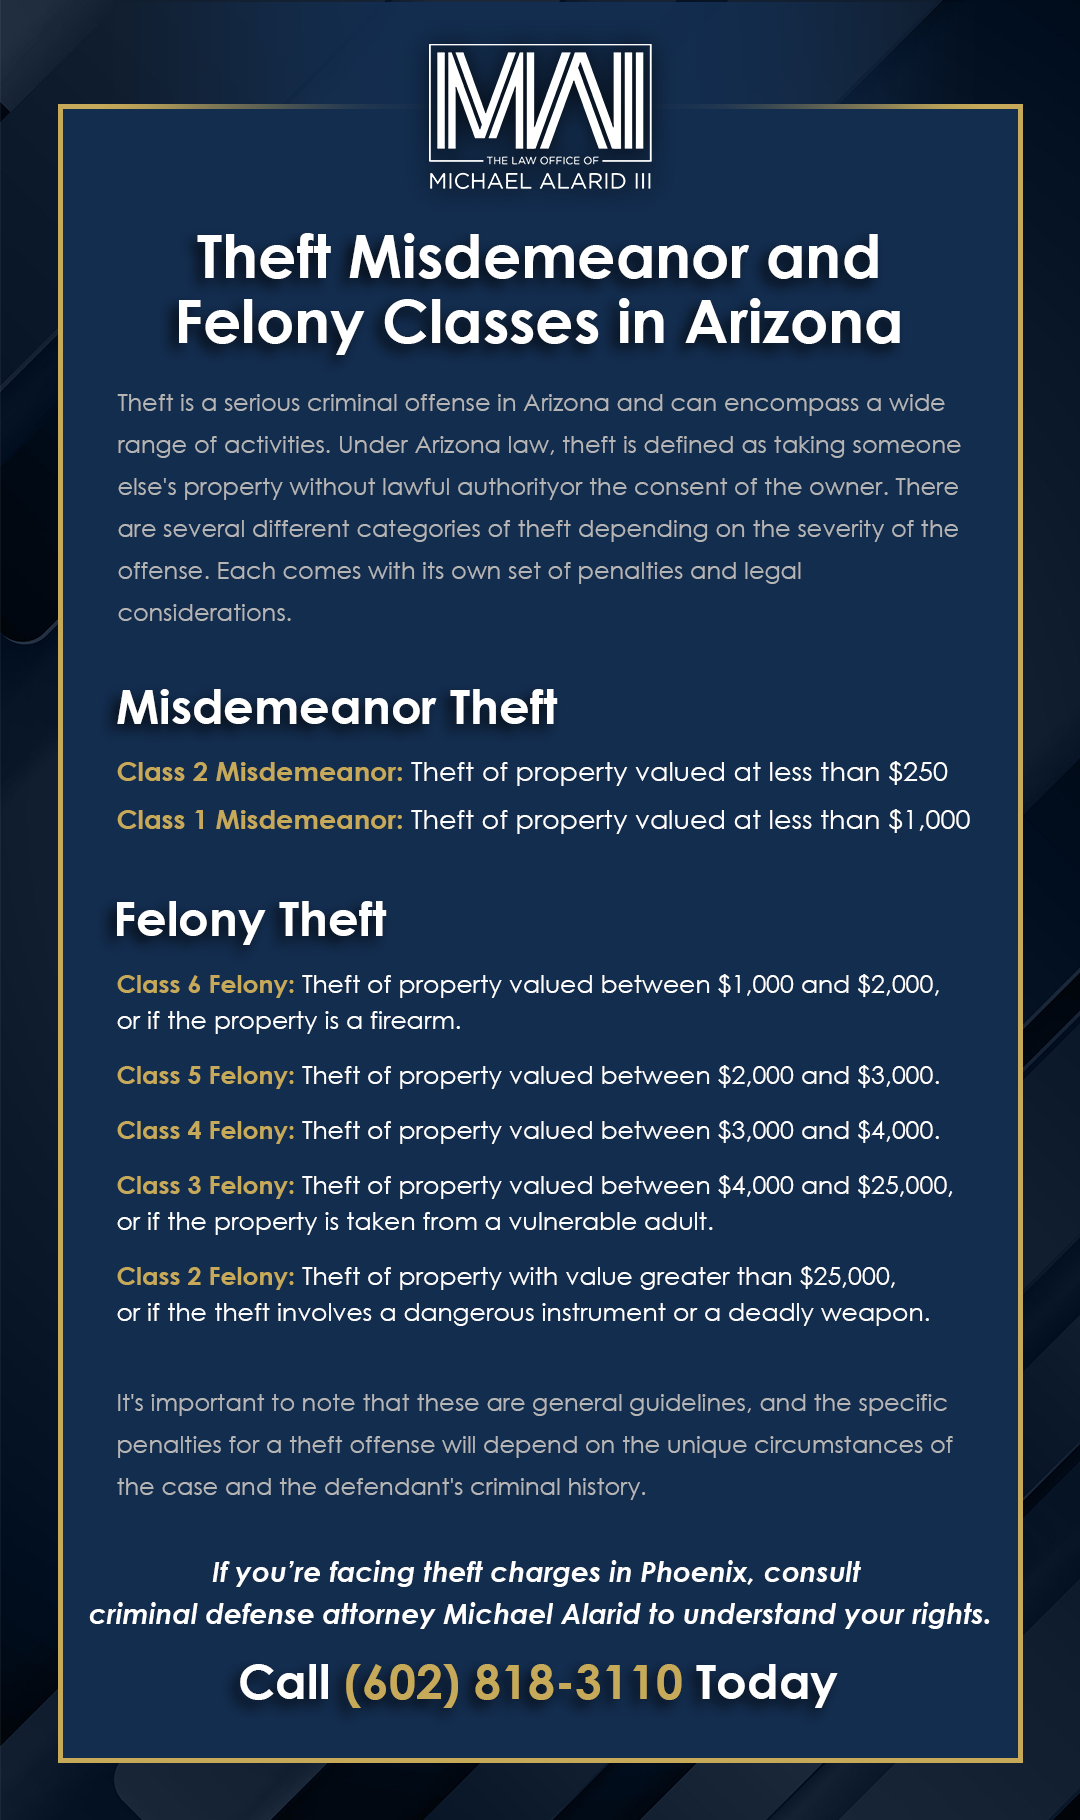 Theft misdemeanor and felony classes in the state of Arizona